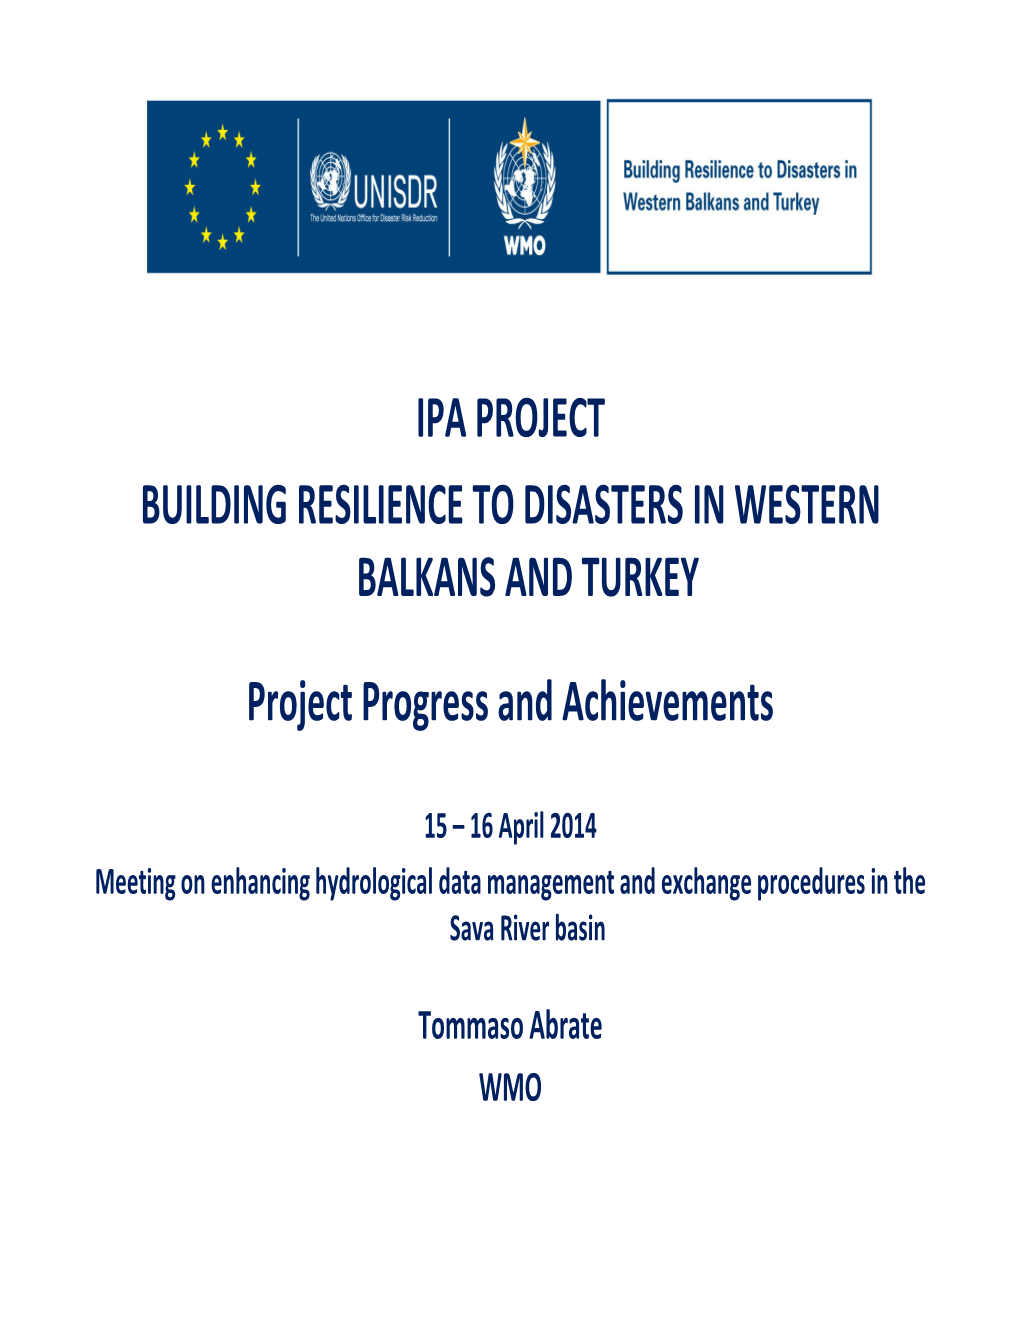 Ipa Project Building Resilience to Disasters in Western Balkans and Turkey